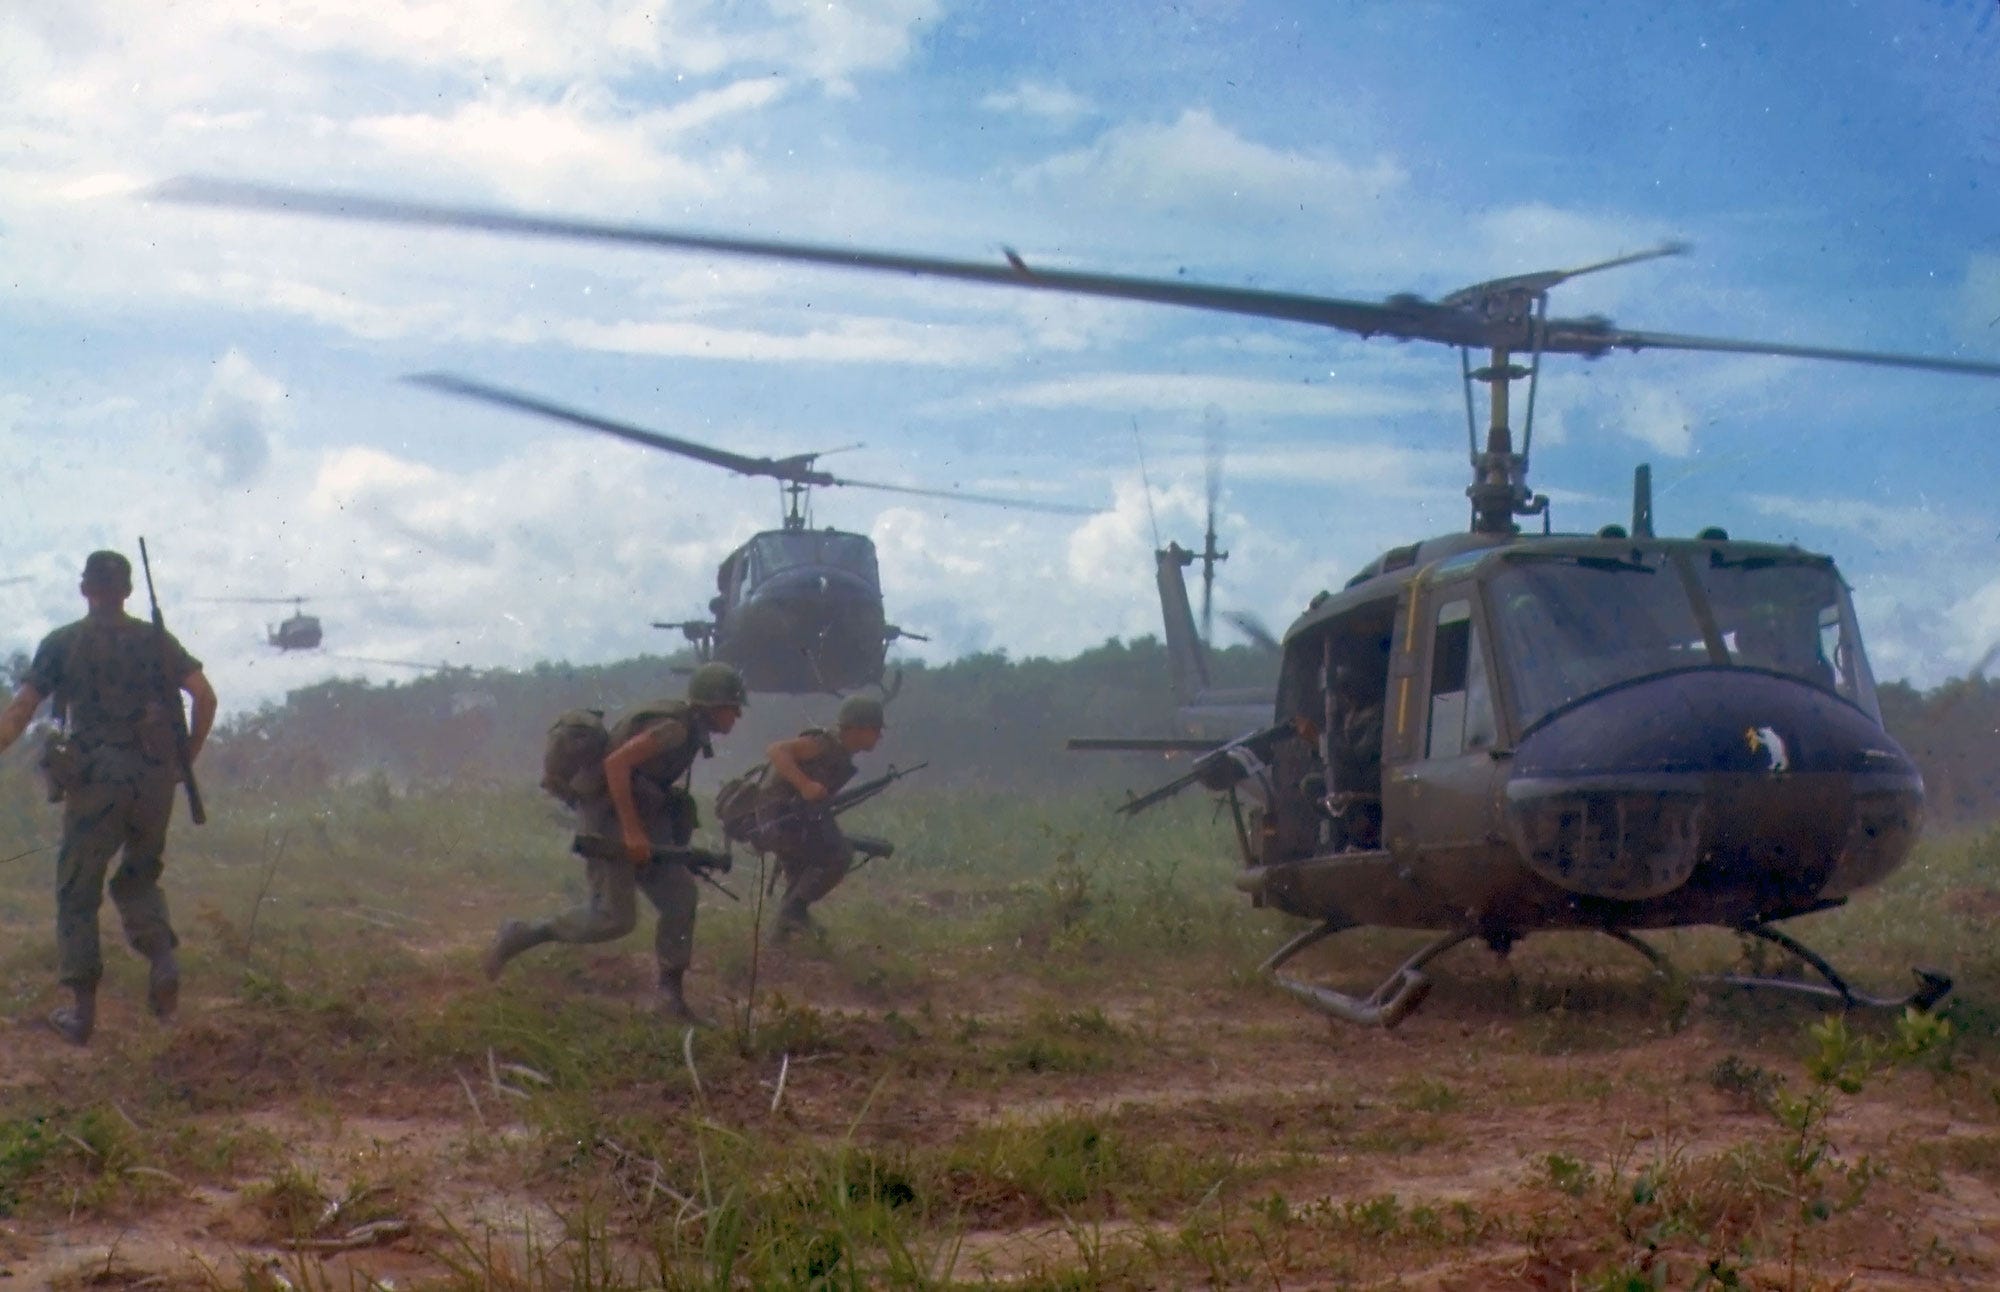 Army Bell UH-1D helicopter in Vietnam